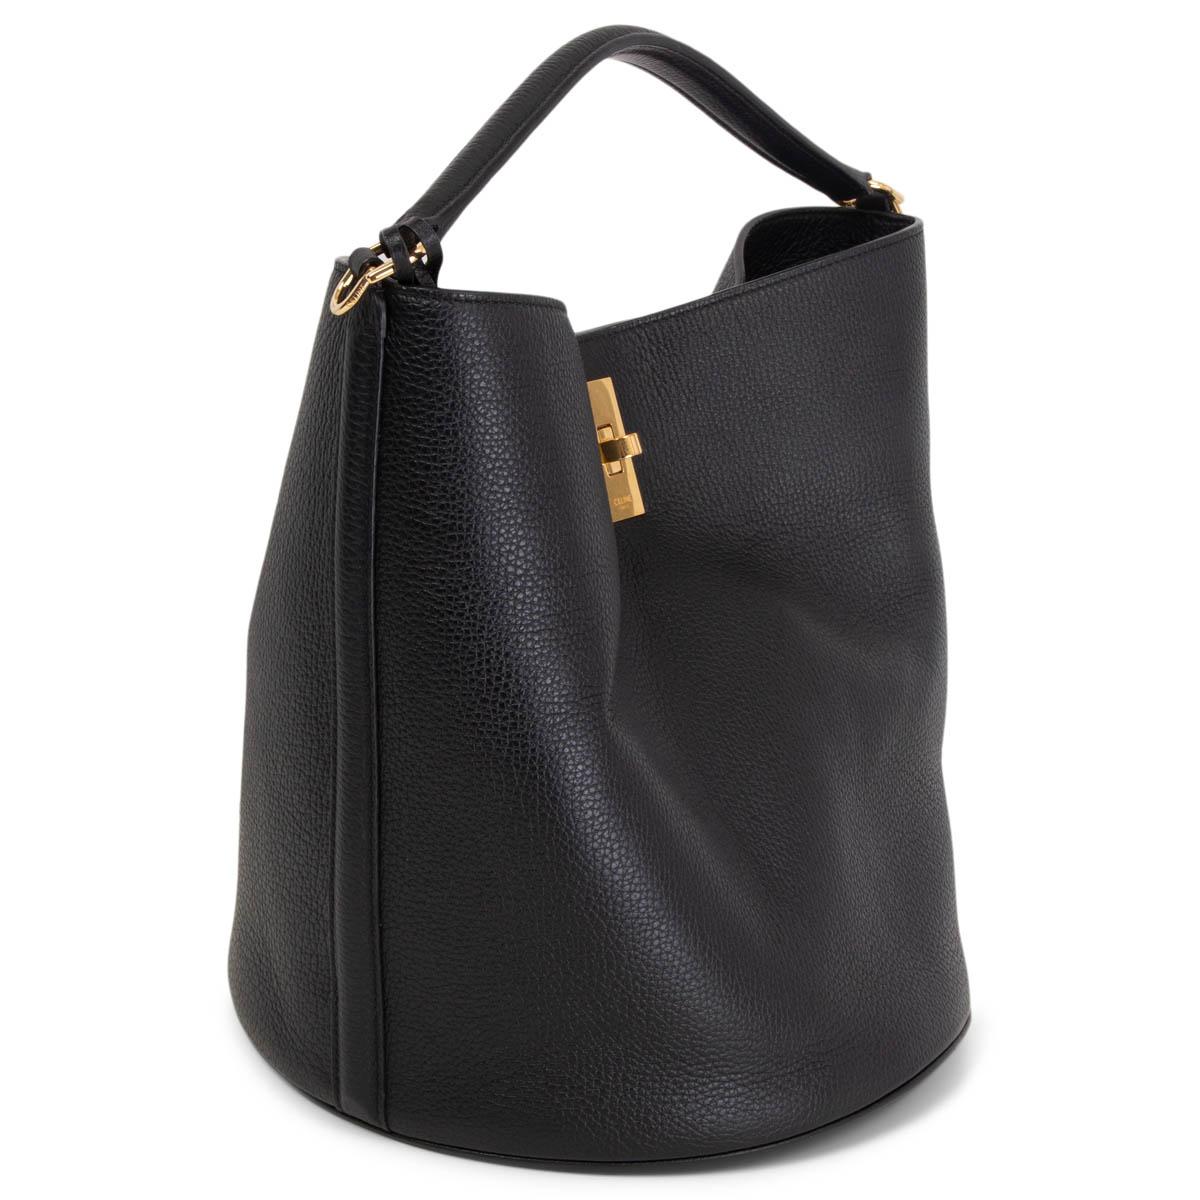 100% authentic Celine Bucket 16 Bag in black supple grained calfskin that features a gold-tone turn-lock closure. Lined in black suede. The bag comes with a removable zipper pouch. Removable shoulder-strap is missing. Has been carried and is in